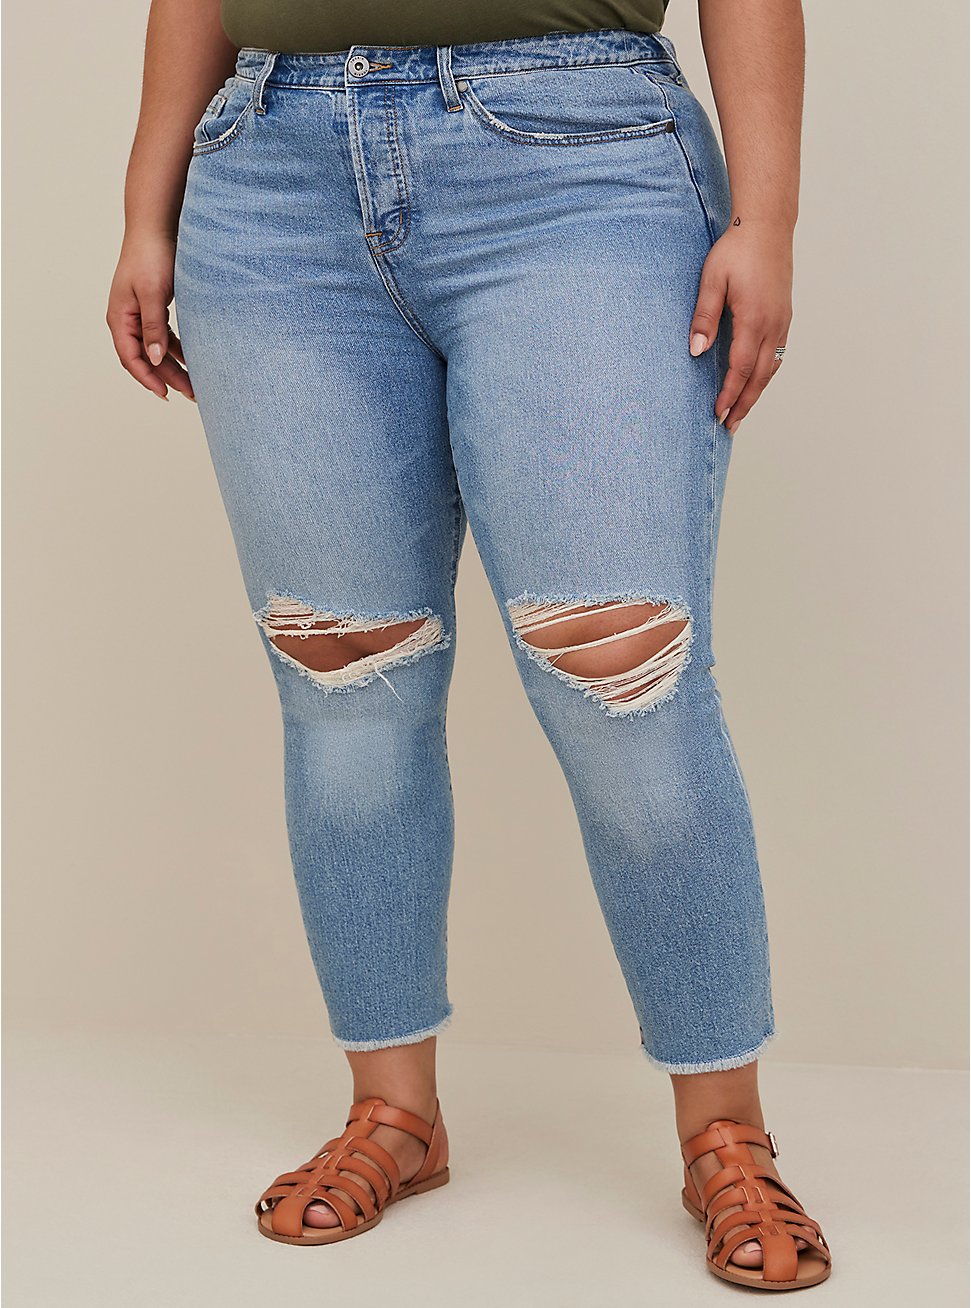 High-Rise Straight Jean – Classic Denim Medium Wash, HAPPINESS FORGETS, hi-res